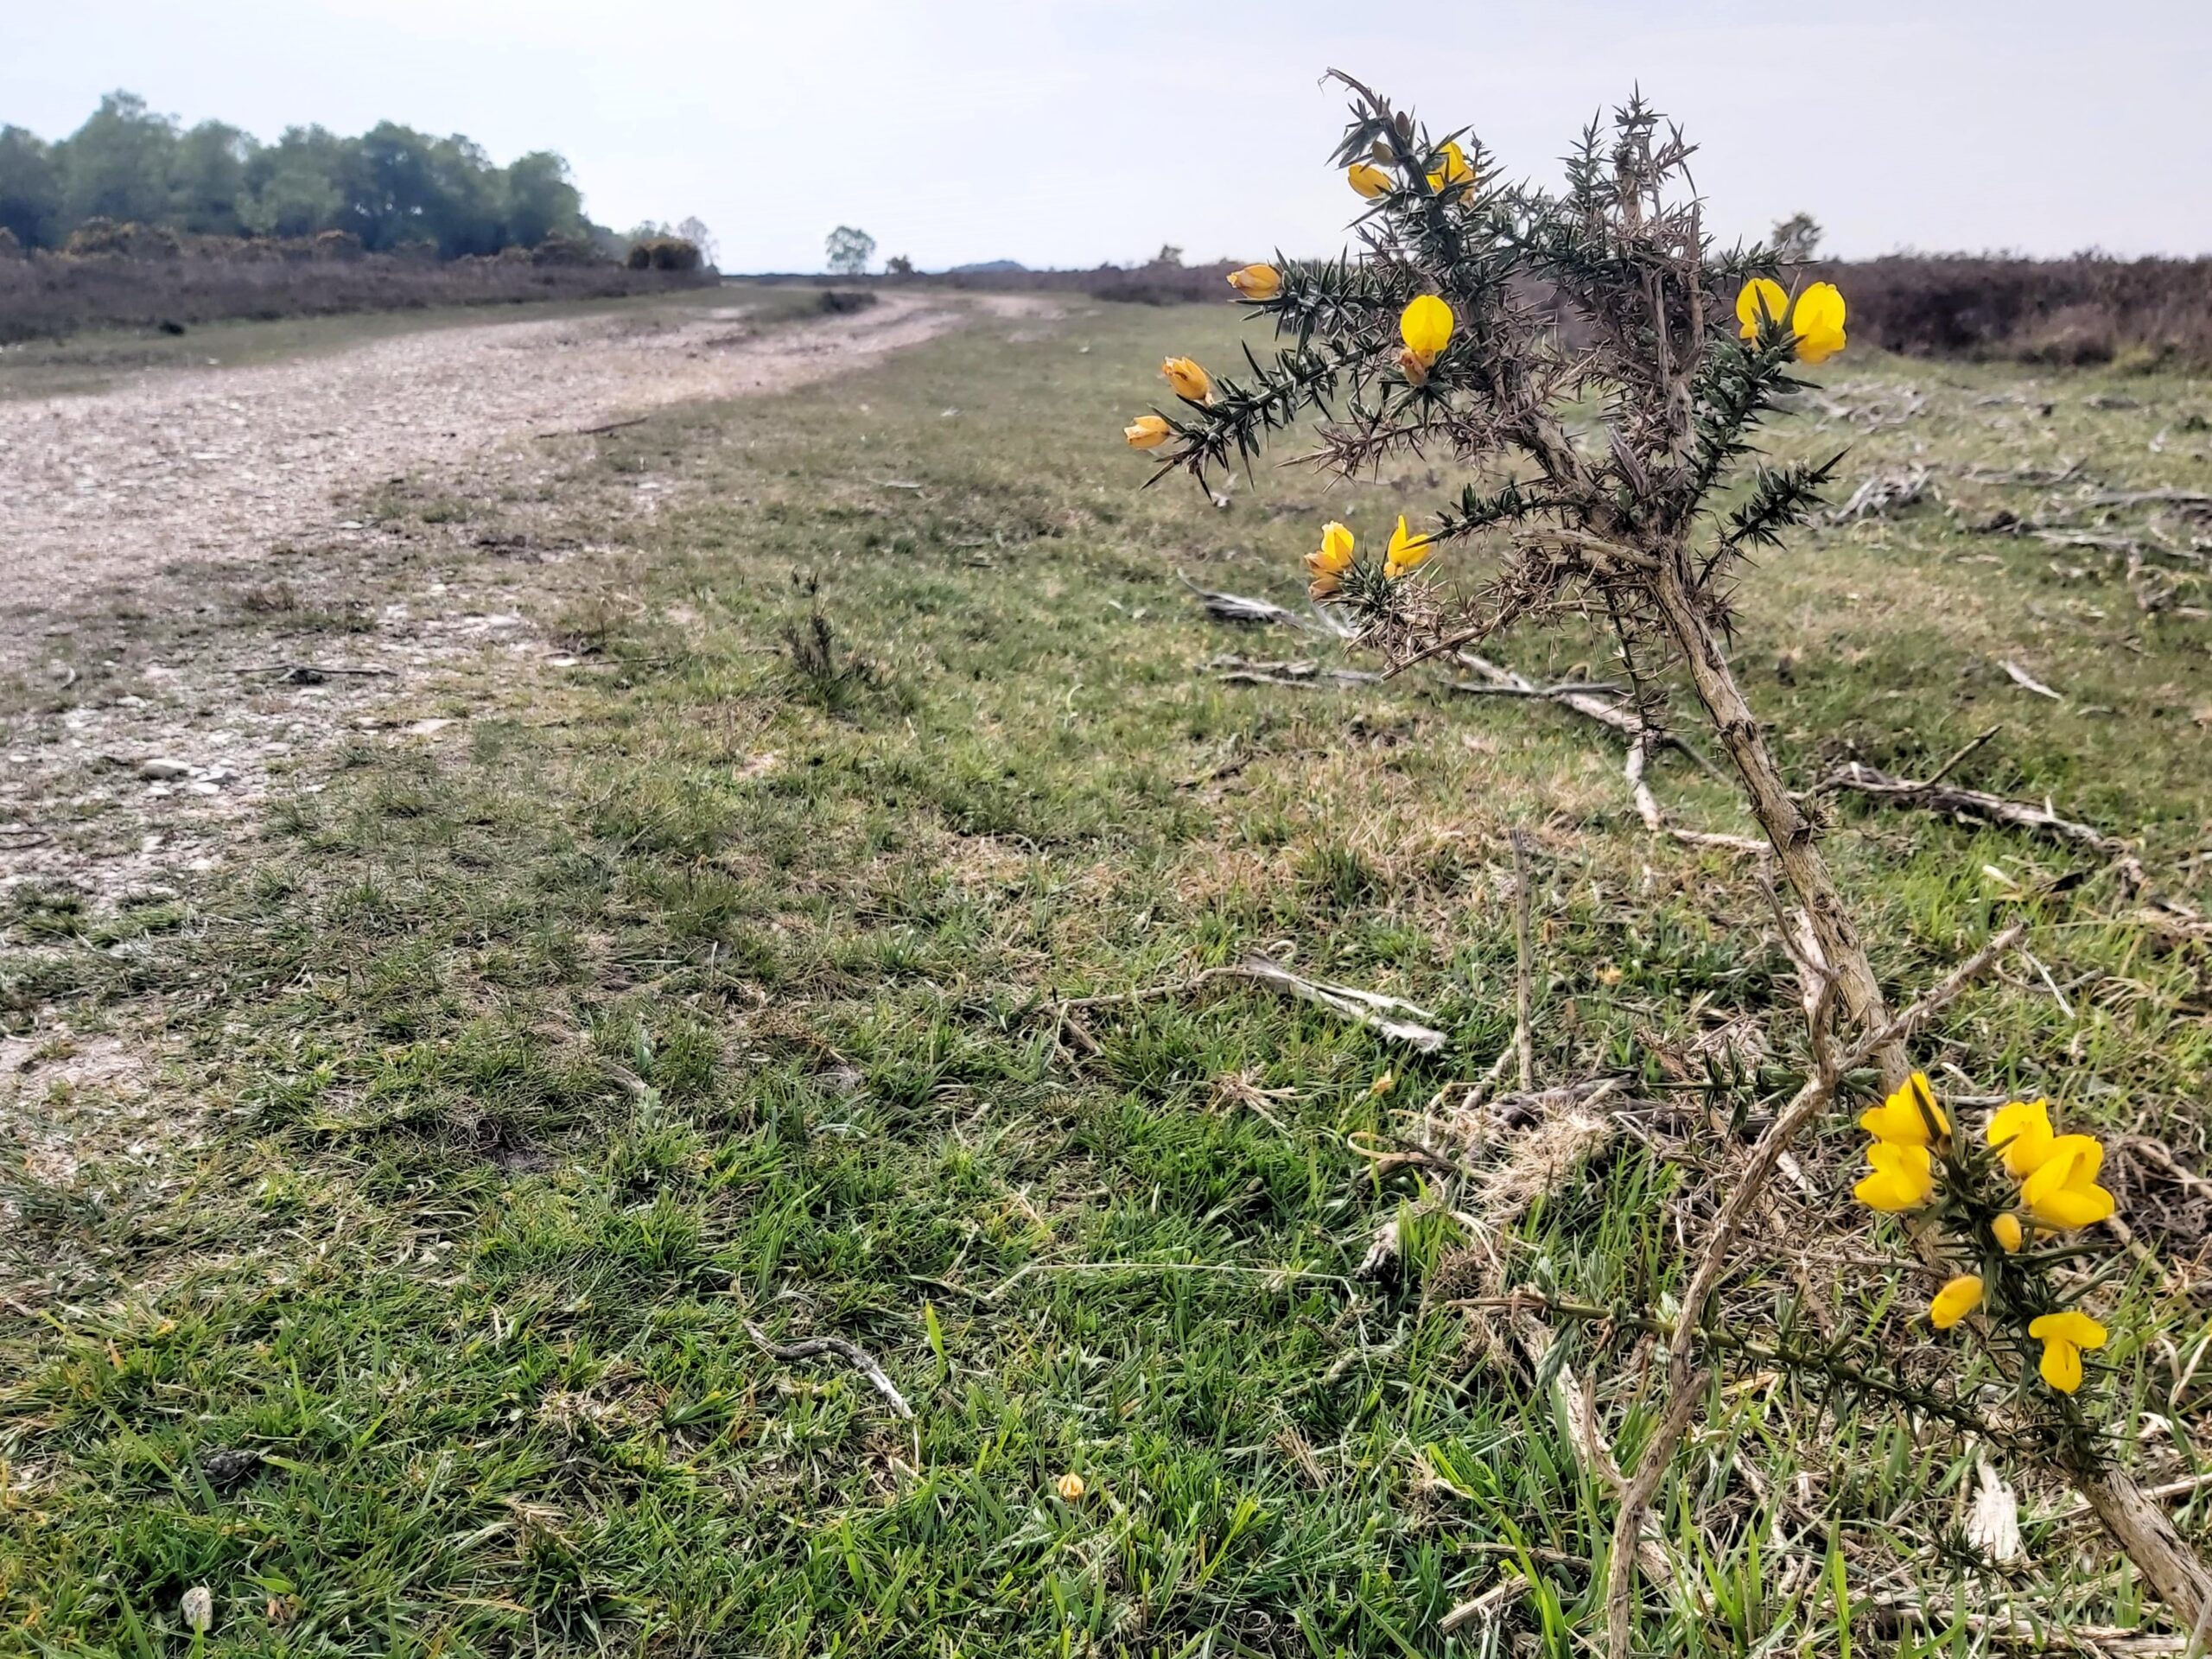 A yellow-flowered thorny branch in the New Forest, England